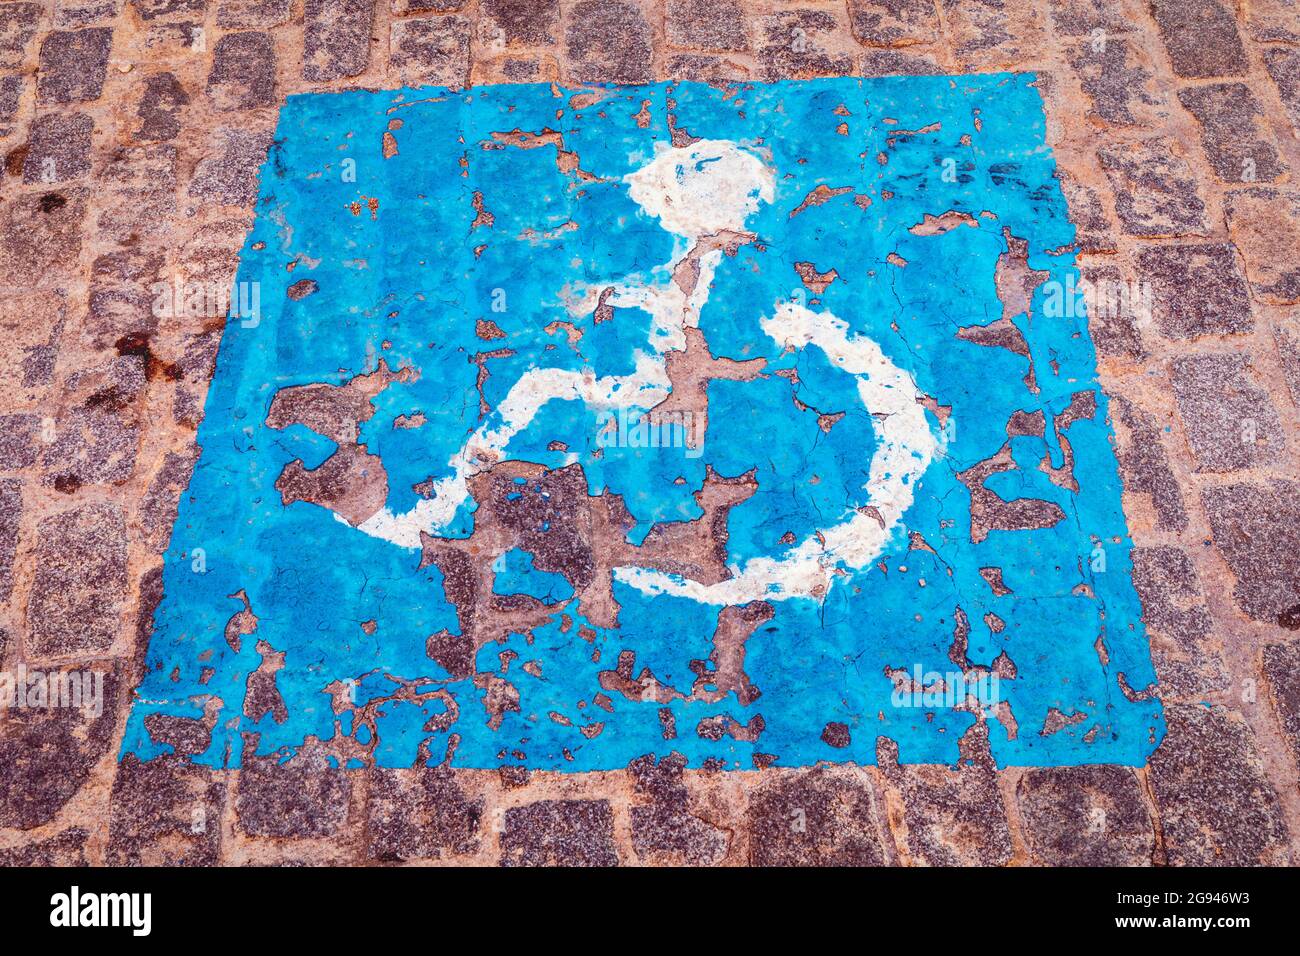 Parking space reserved for disabled drivers or drivers carrying disabled passengers. Stock Photo